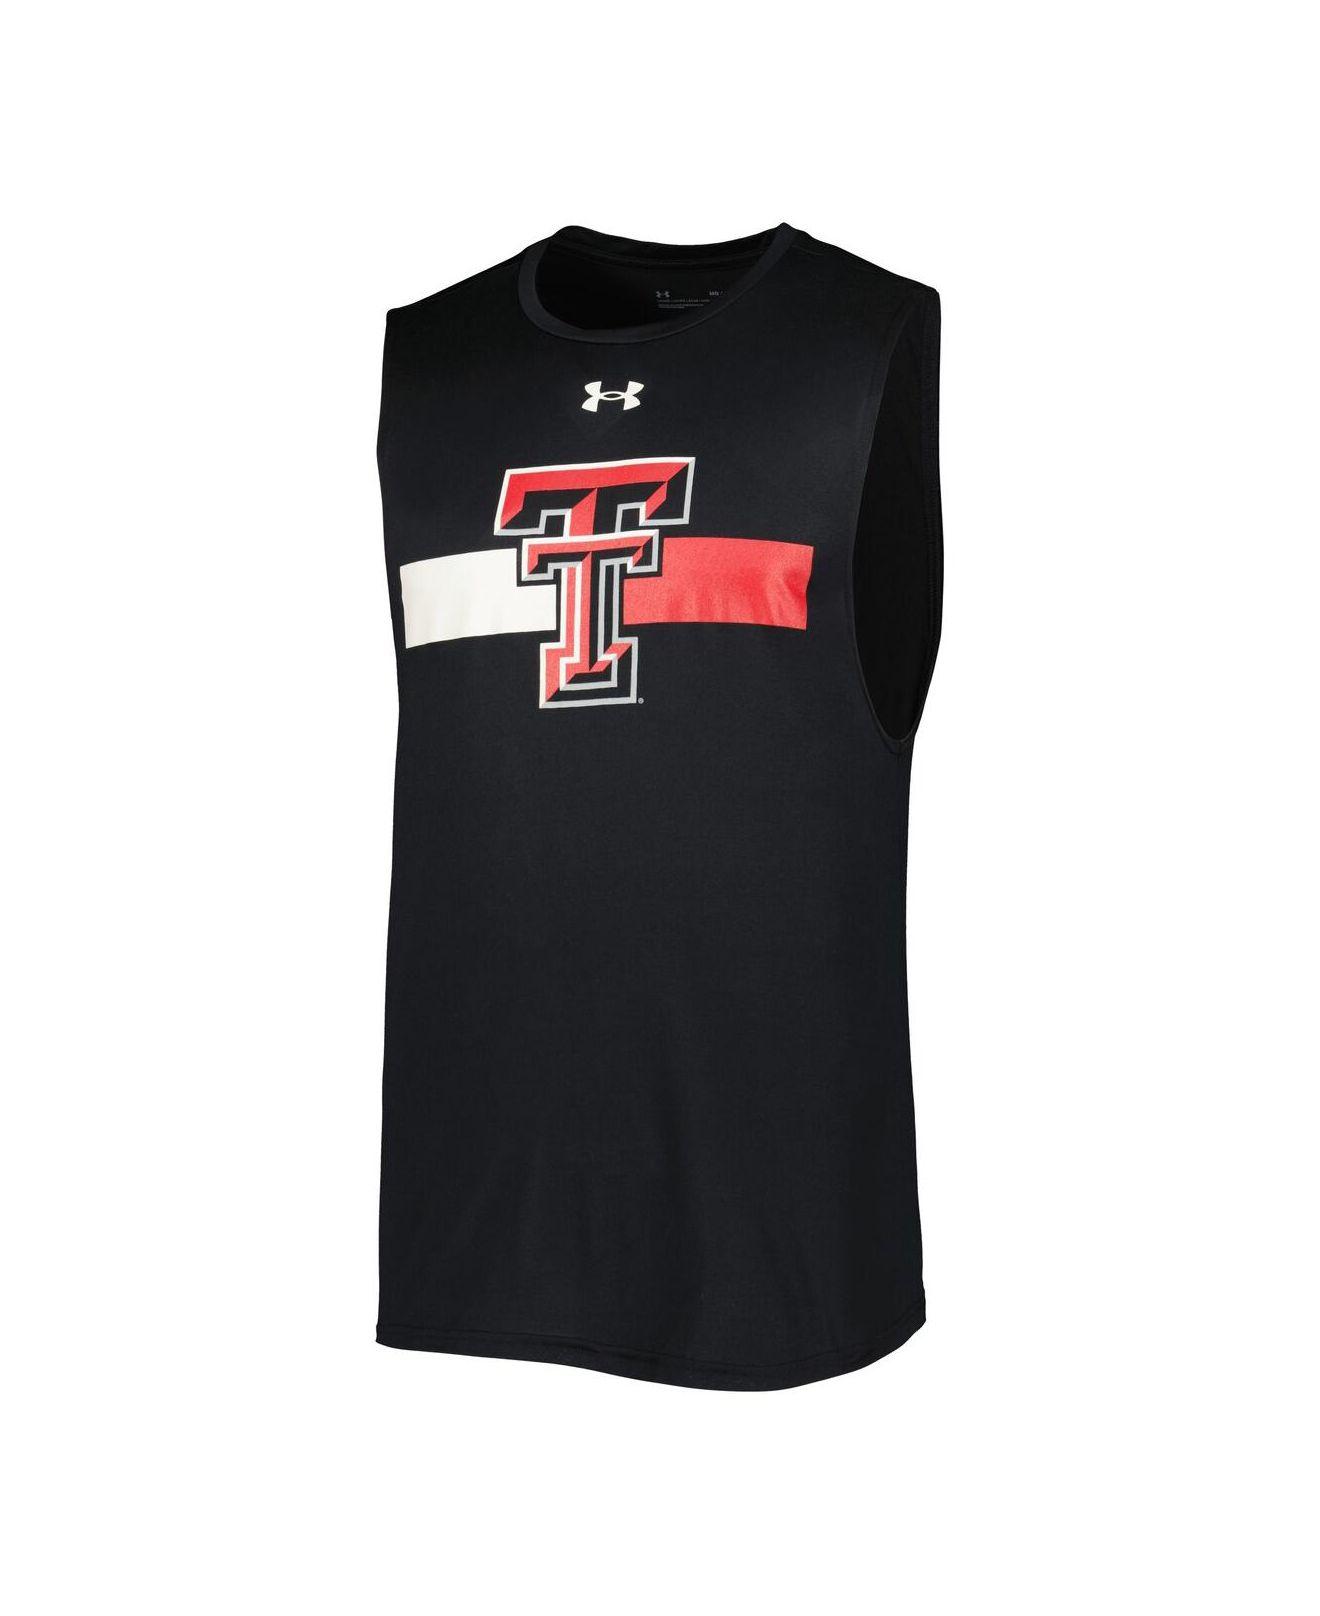 Men's Under Armour White Texas Tech Red Raiders Replica Baseball Jersey Size: Small